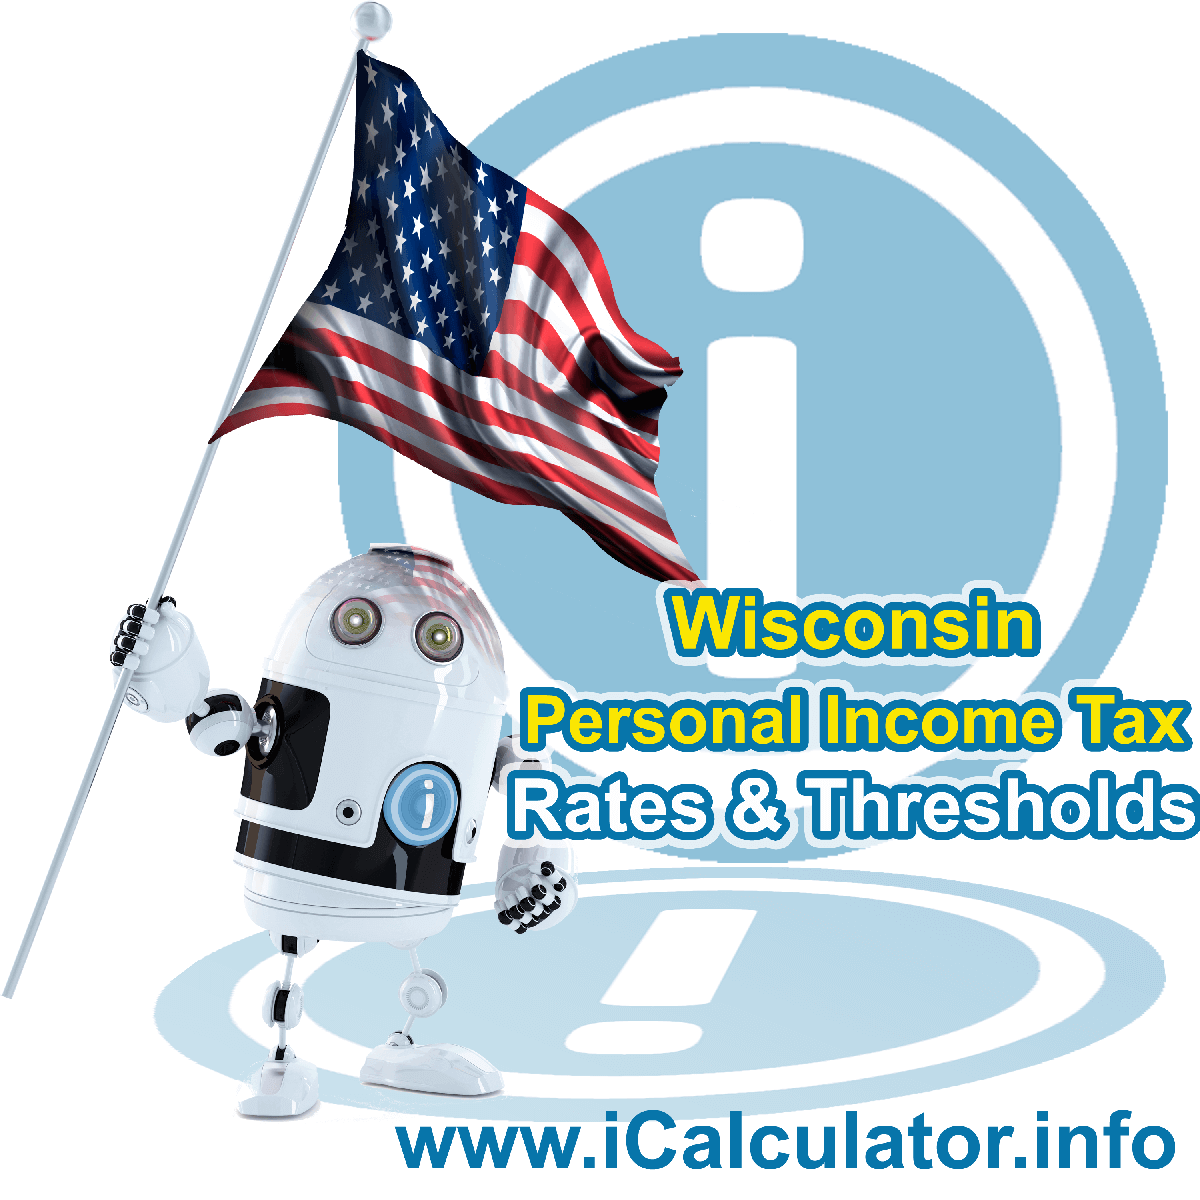 Wisconsin State Tax Tables 2014. This image displays details of the Wisconsin State Tax Tables for the 2014 tax return year which is provided in support of the 2014 US Tax Calculator